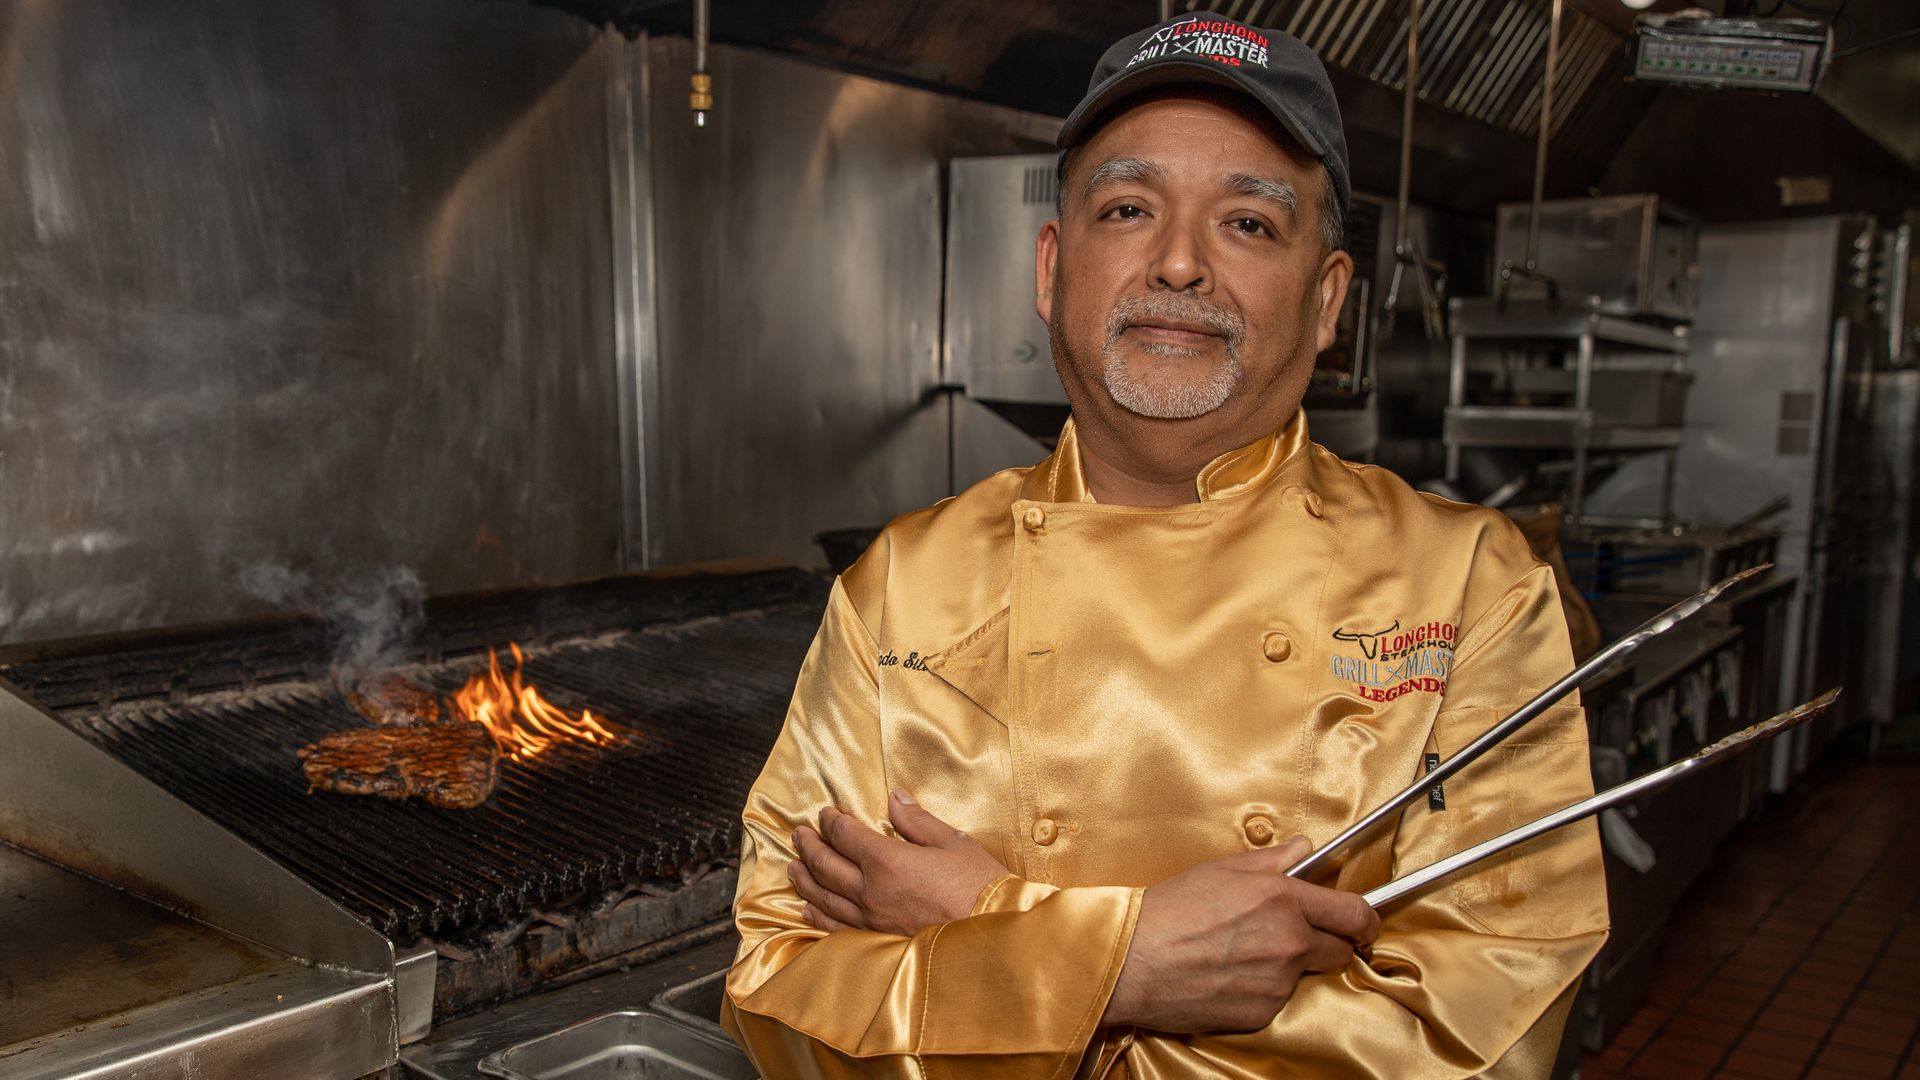 Santos wearing his gold jacket and standing in front of a grill with a steak on it